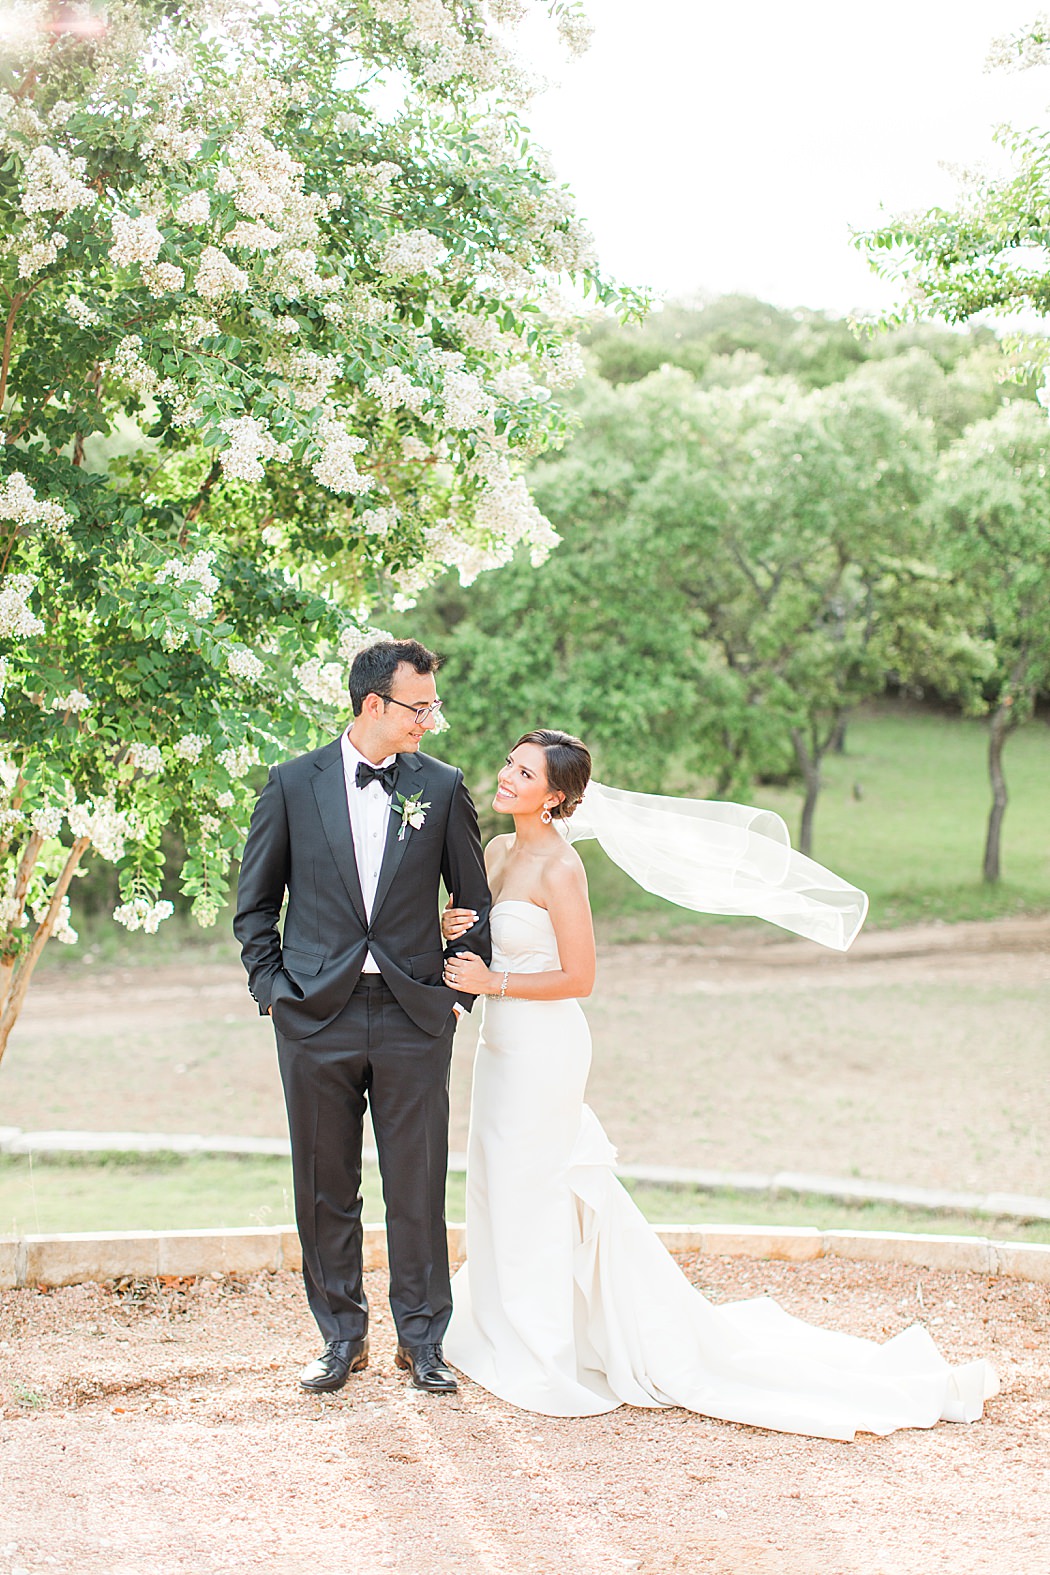 A Black and White Summer wedding at Kendall Point venue in Boerne Texas 0091